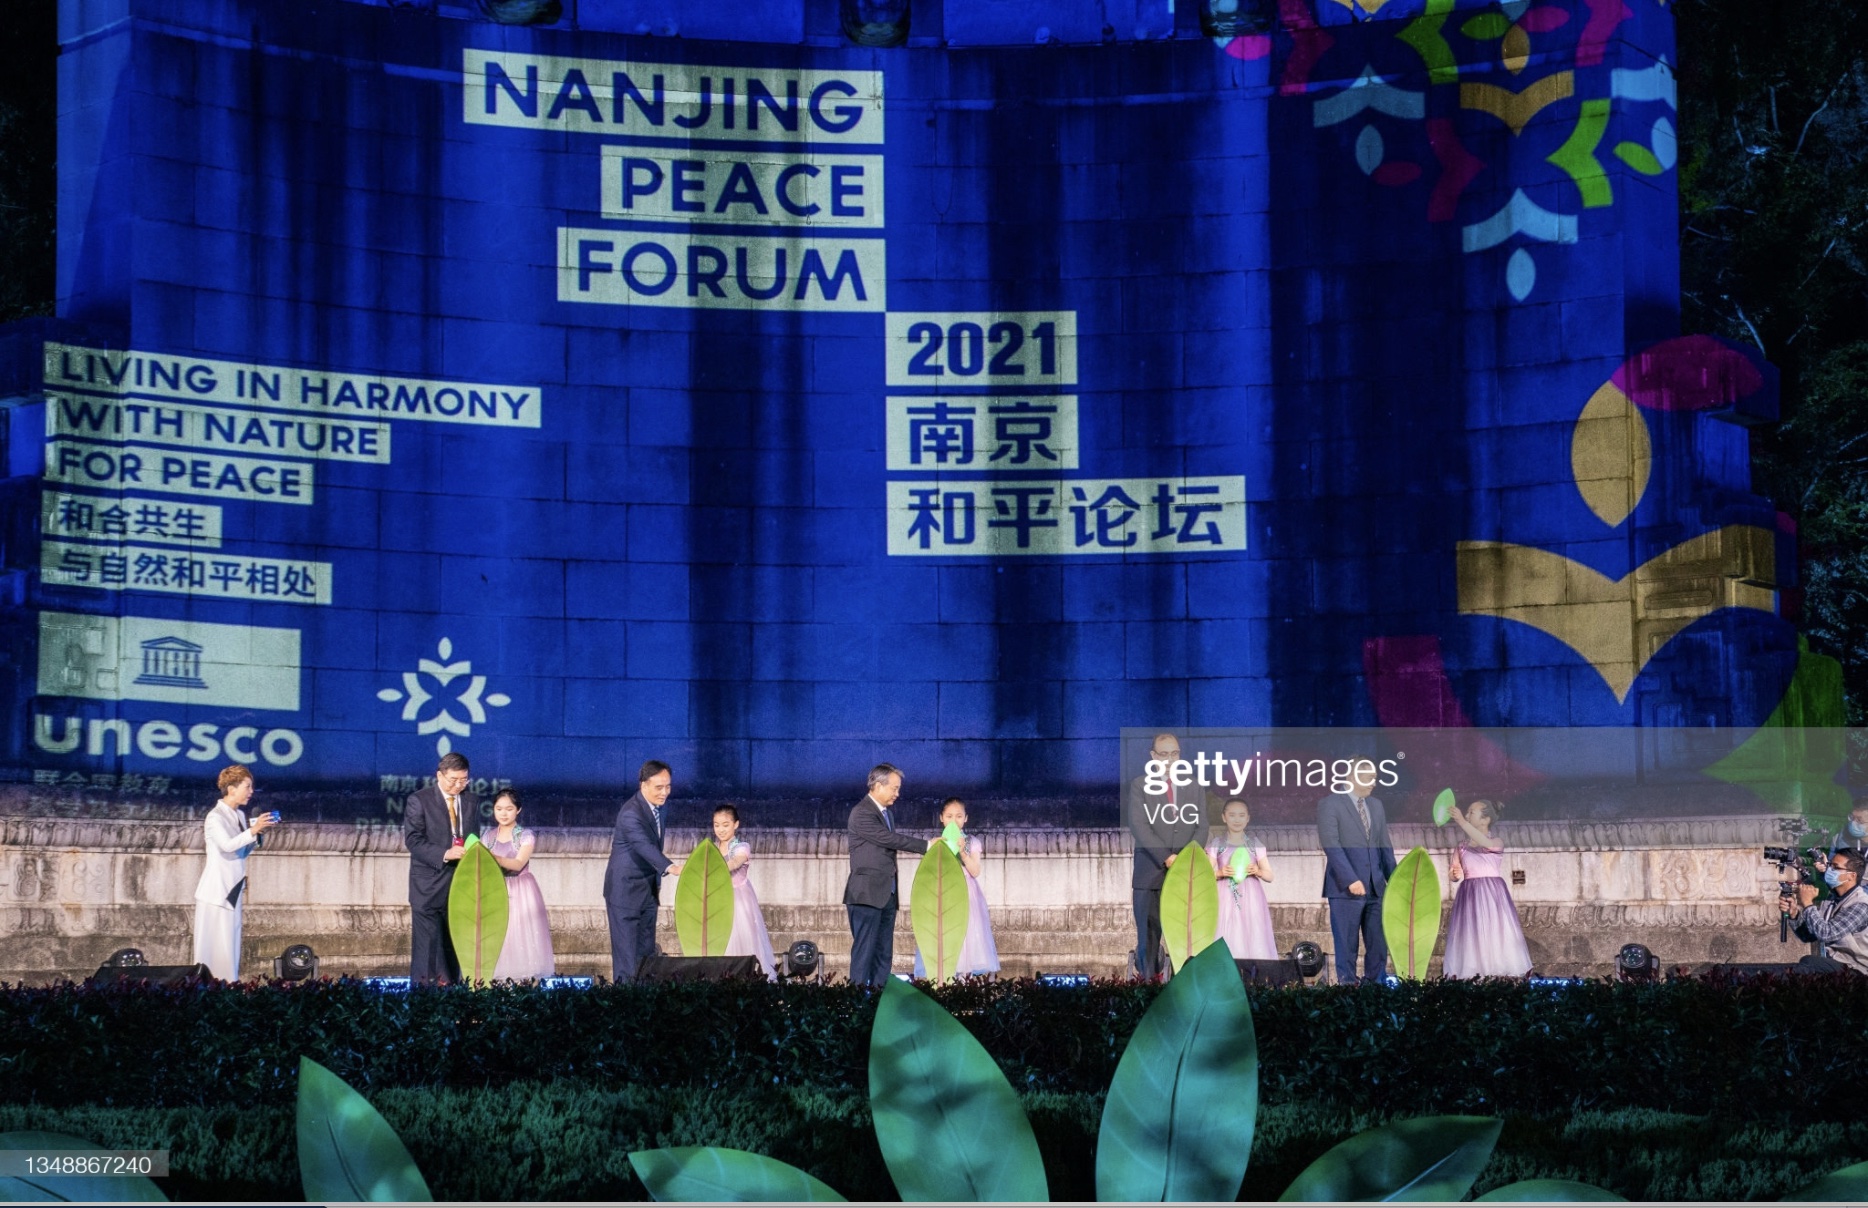 2021 Nanjing Peace Forum successfully concluded and released the "Nanjing Peace Consensus"